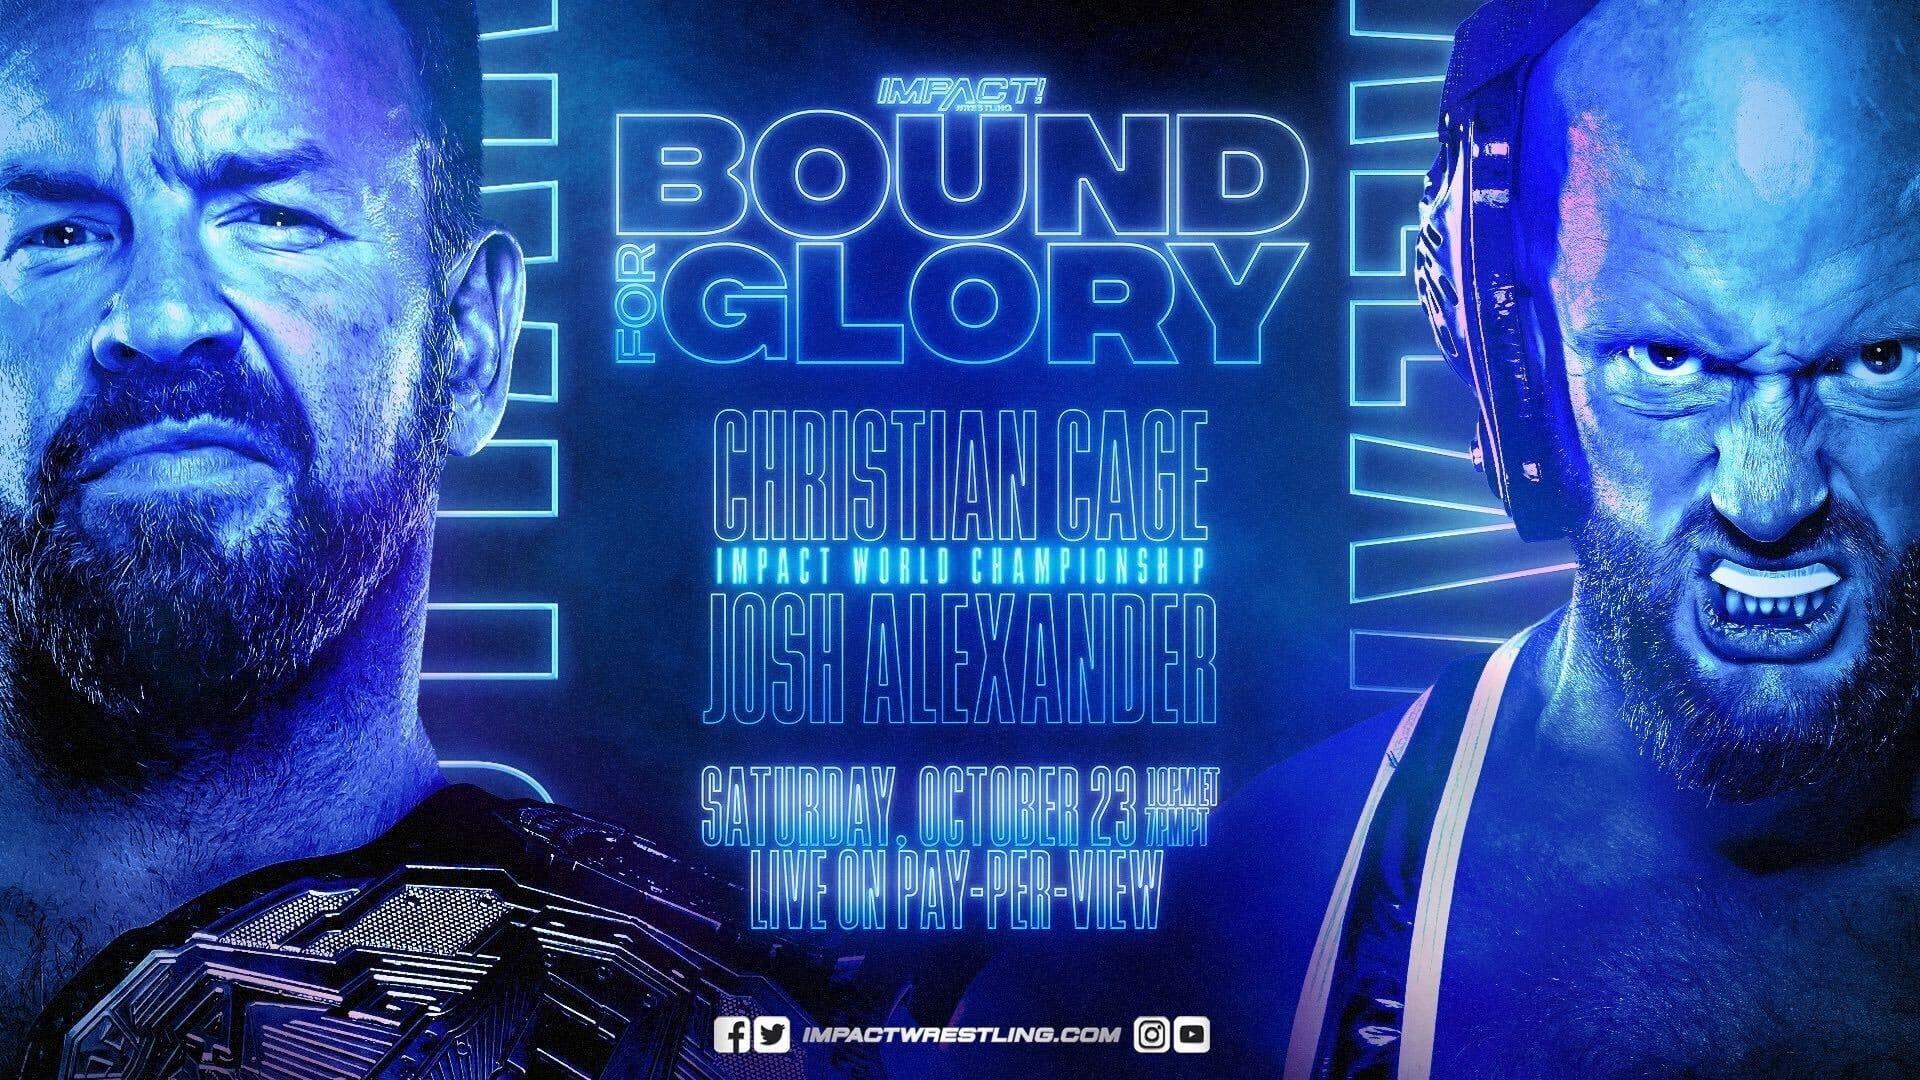 IMPACT Wrestling: Bound For Glory backdrop